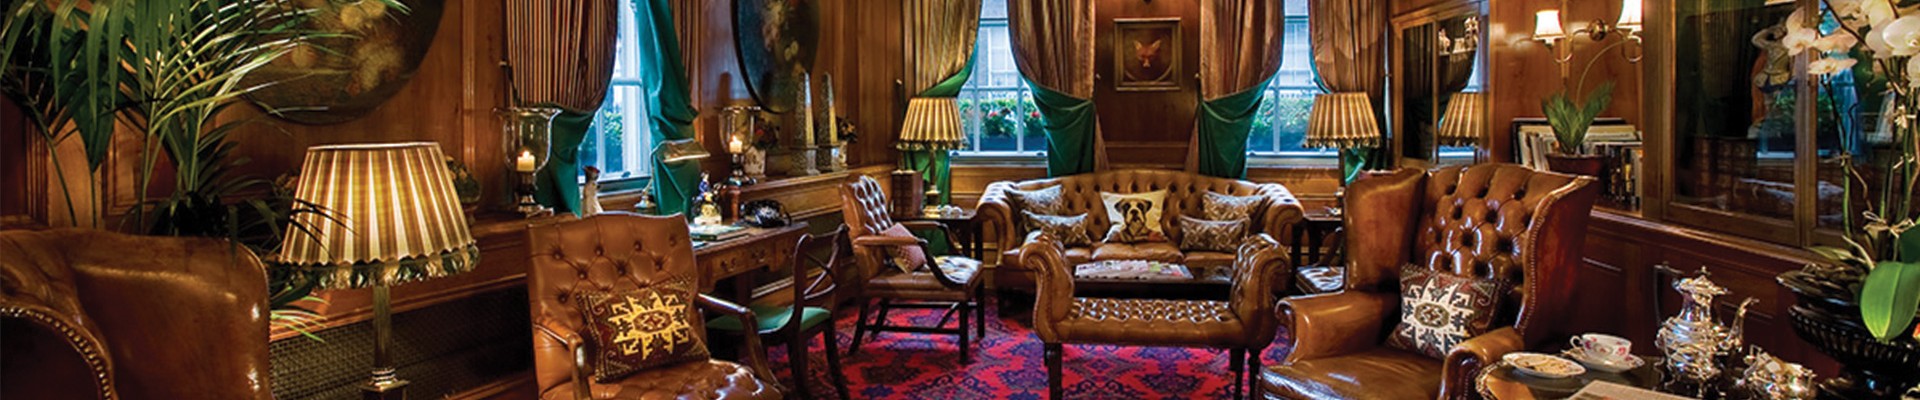 4* The Chesterfield Mayfair - London Package (5 Nights)